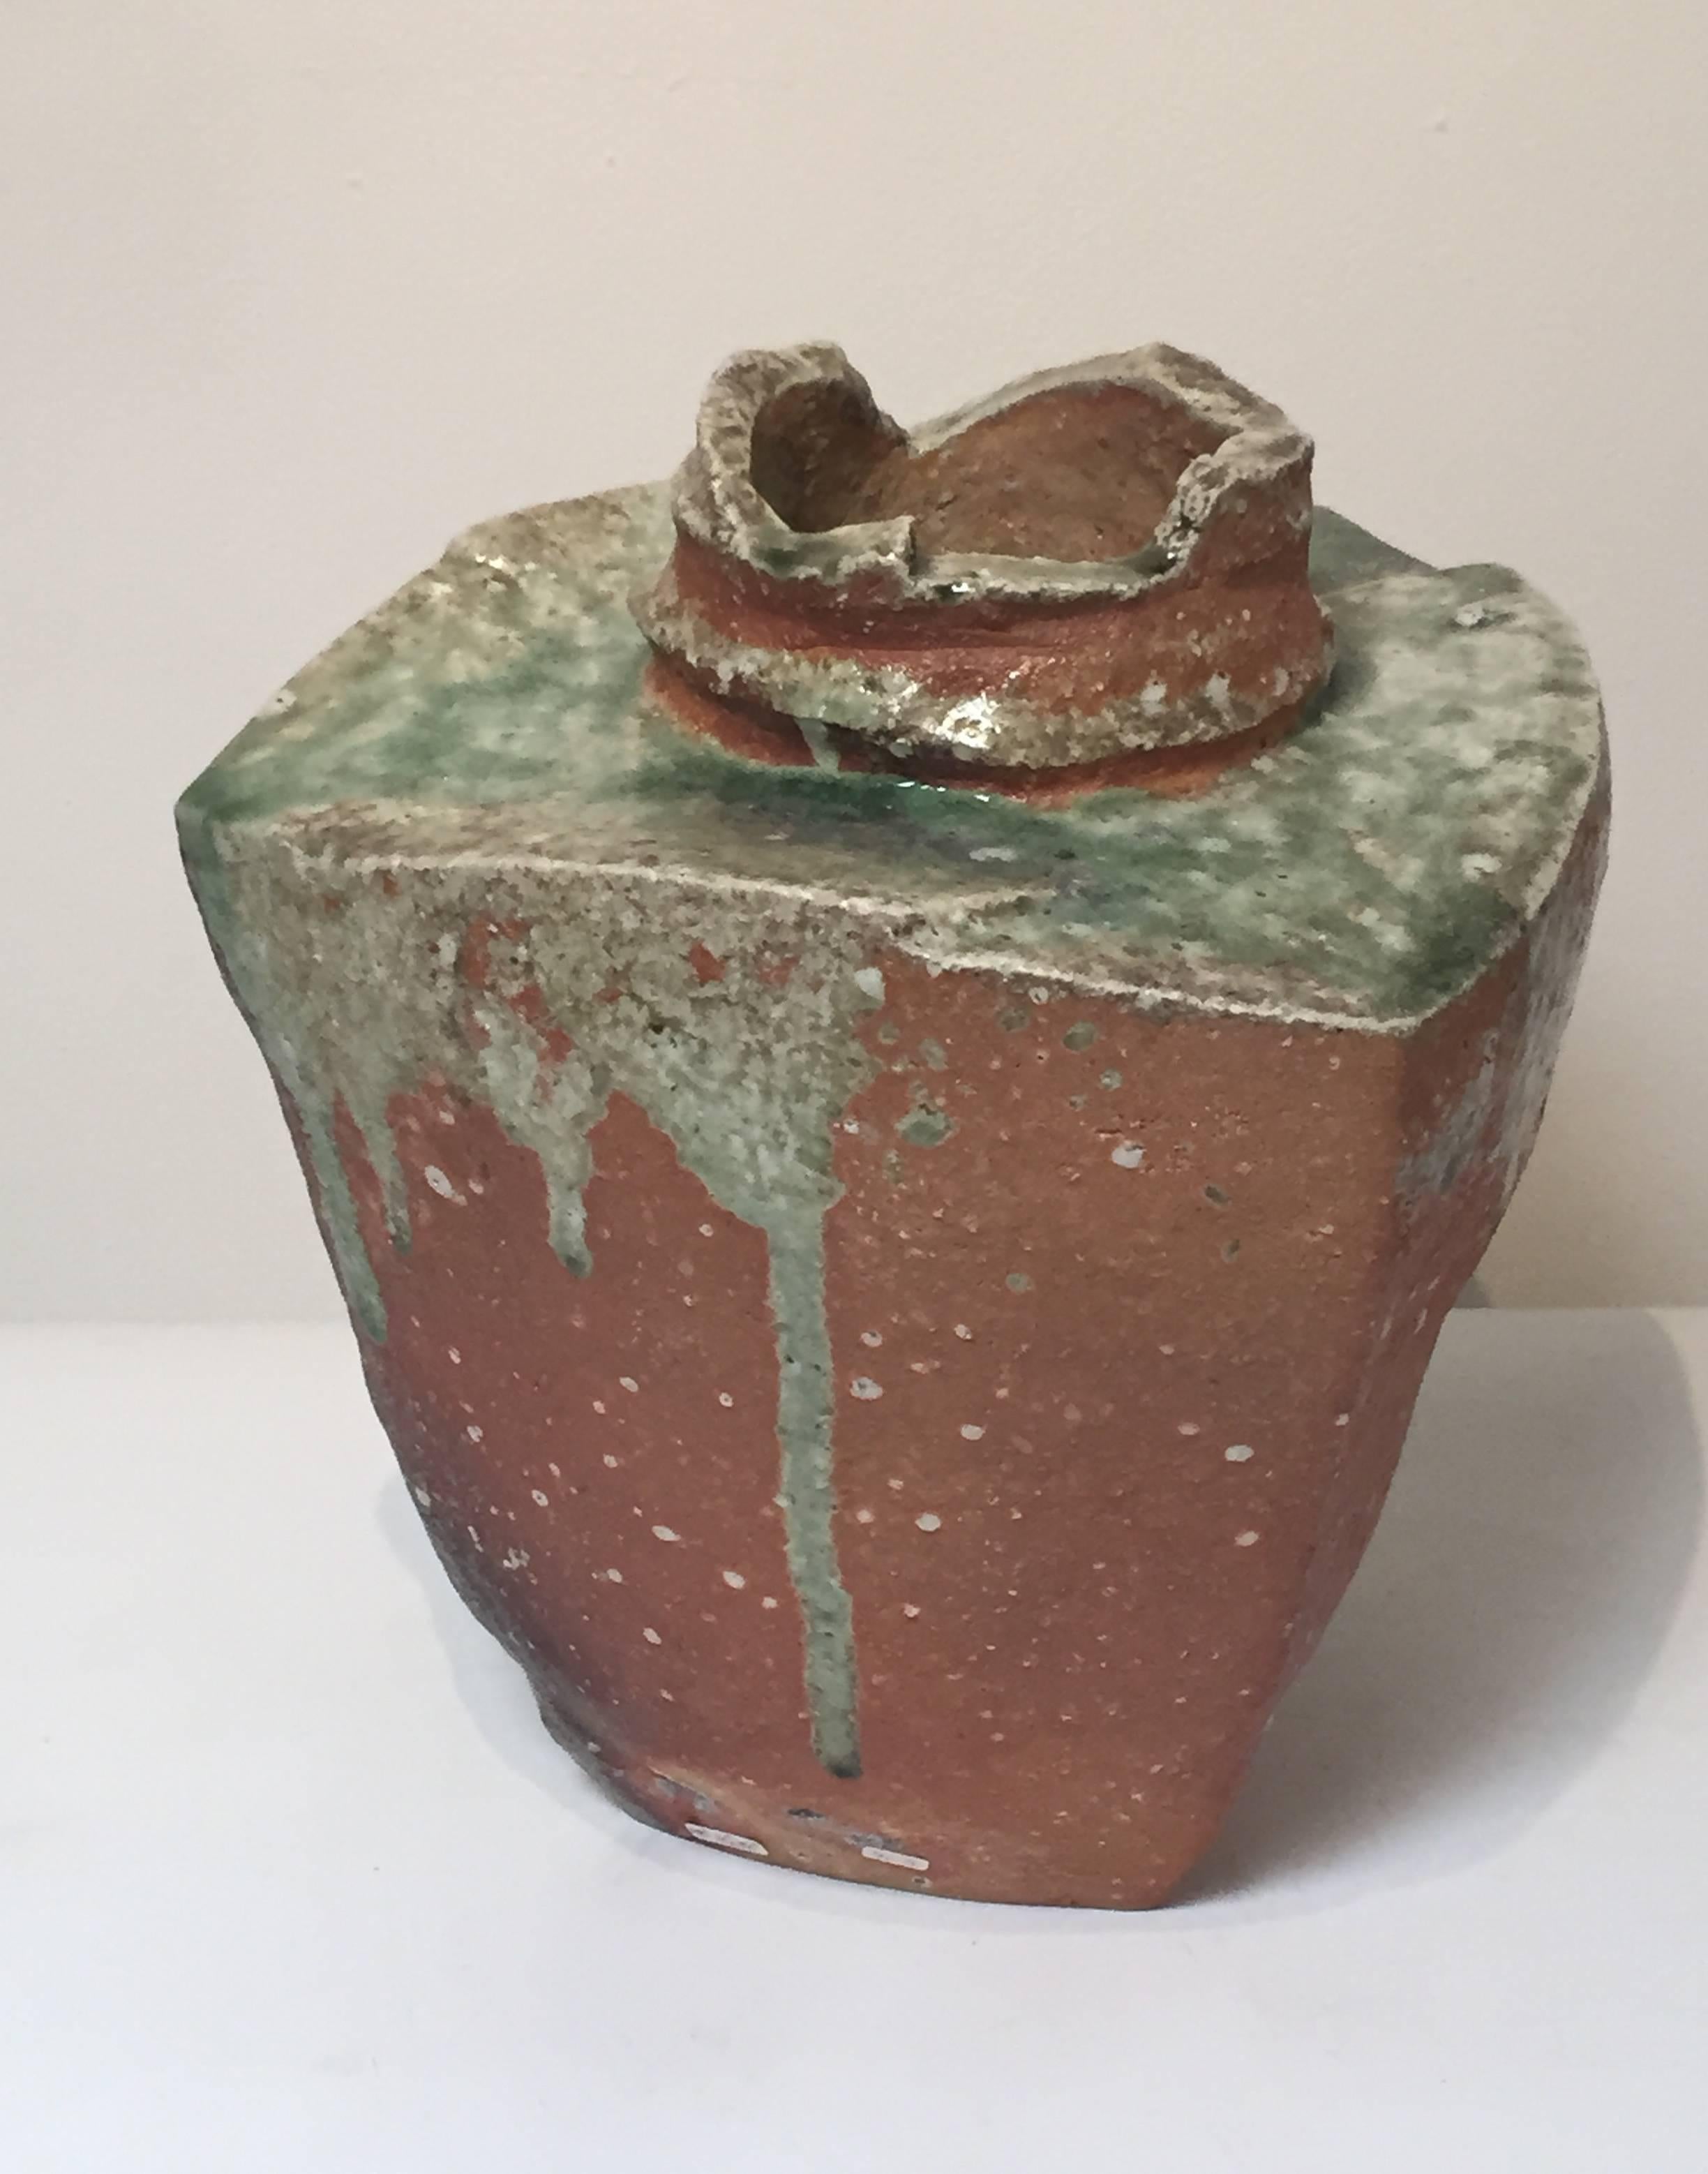 
Here is a stunning three sided vase in the Classic Iga Tradition of attaining spectacular ash glaze effects. Mossy green and emerald glazes POOL and drip over the burnt red clay.
Fujioka Shuhei is a master ceramic artist known for creating